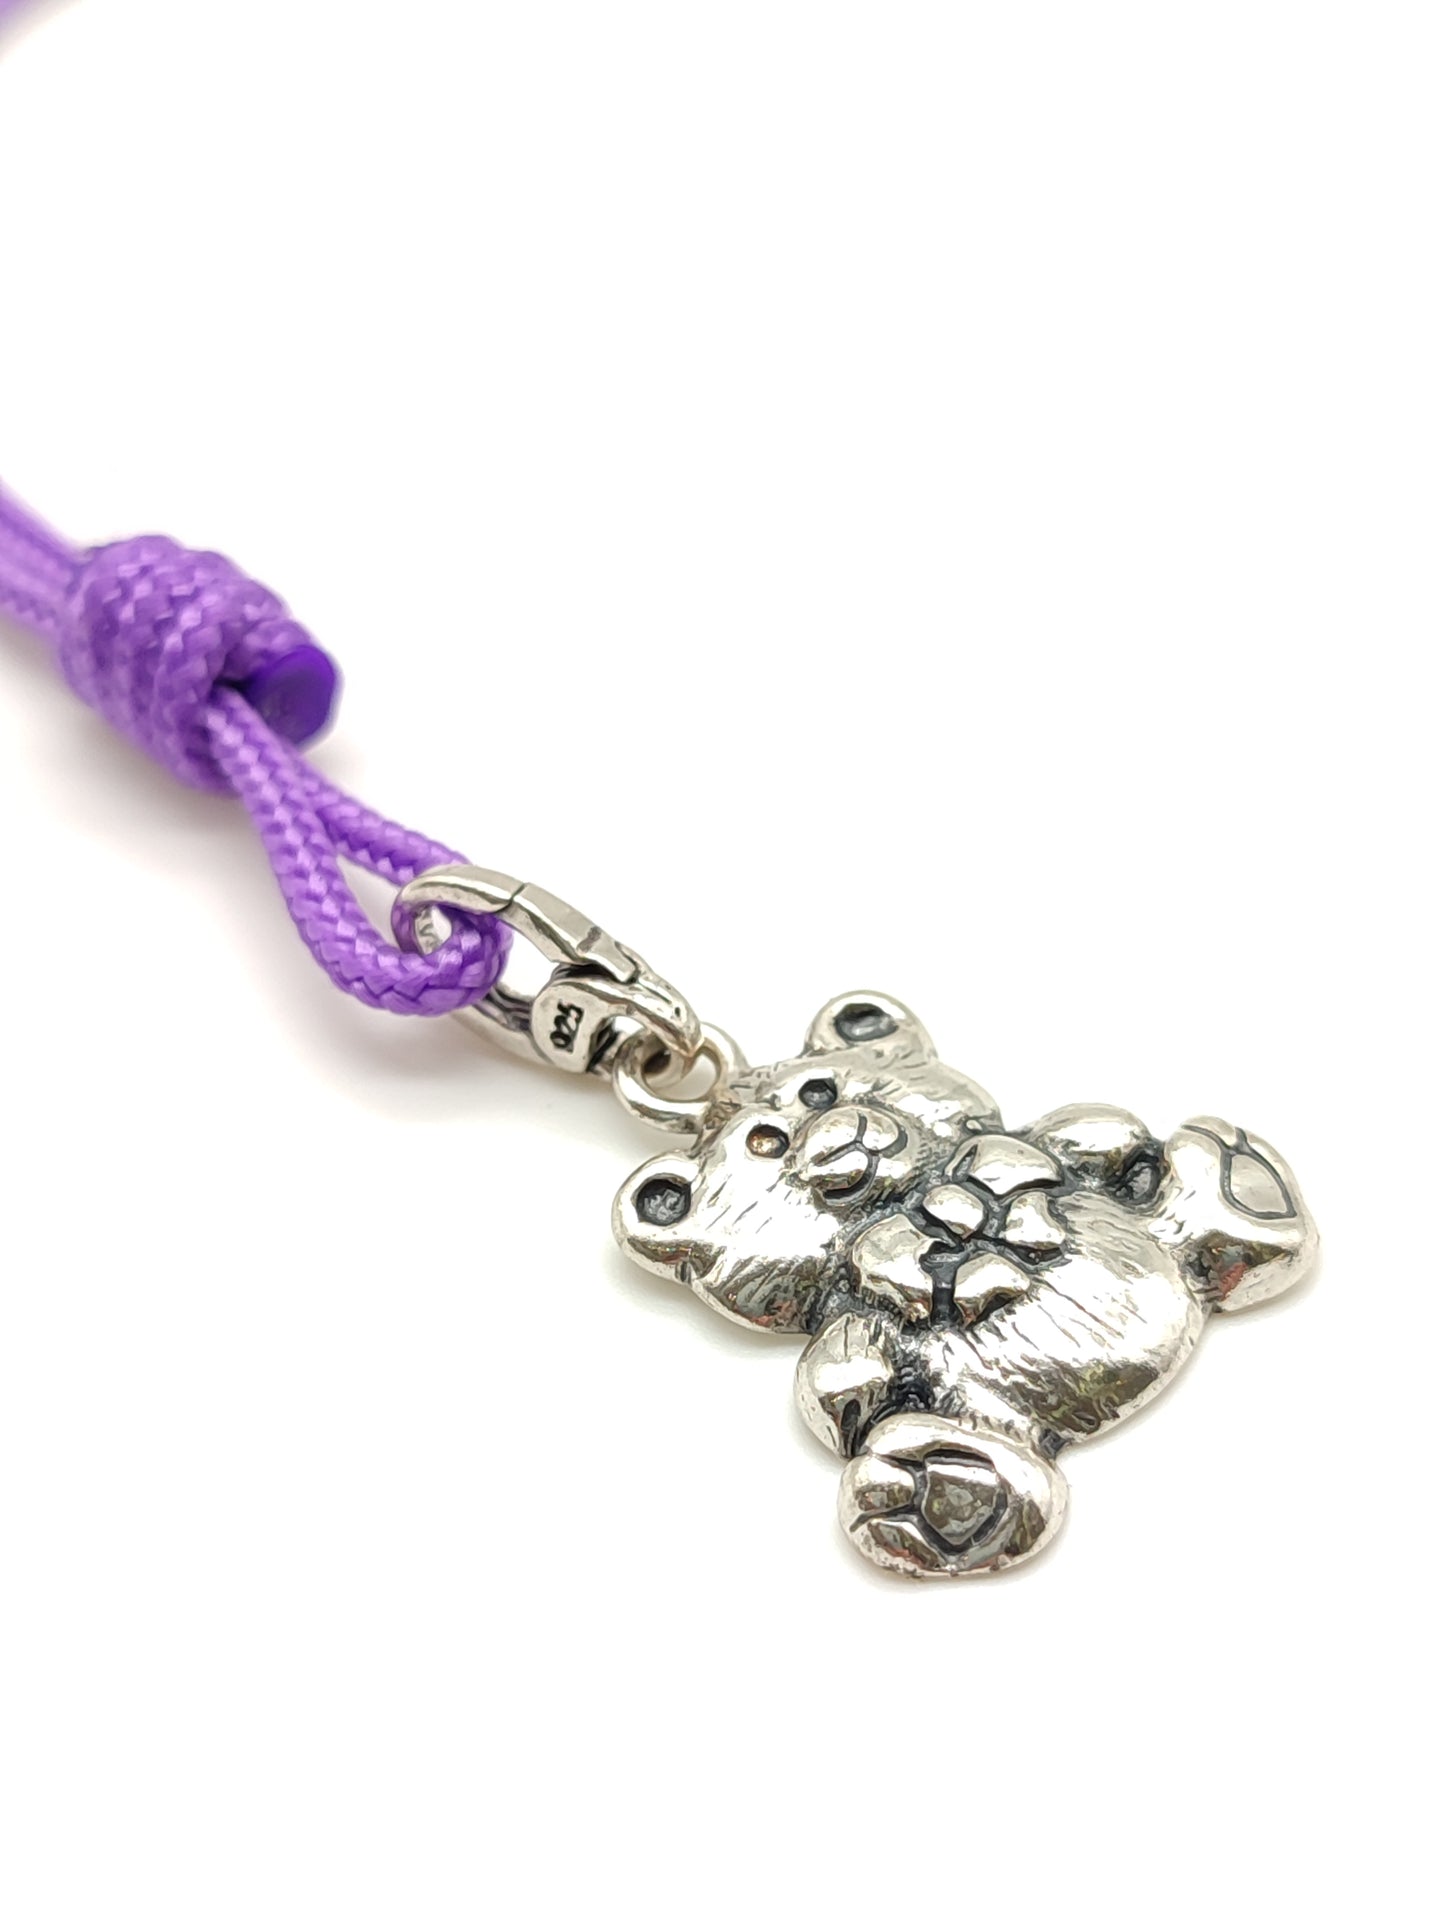 Silver teddy bear key ring with rope